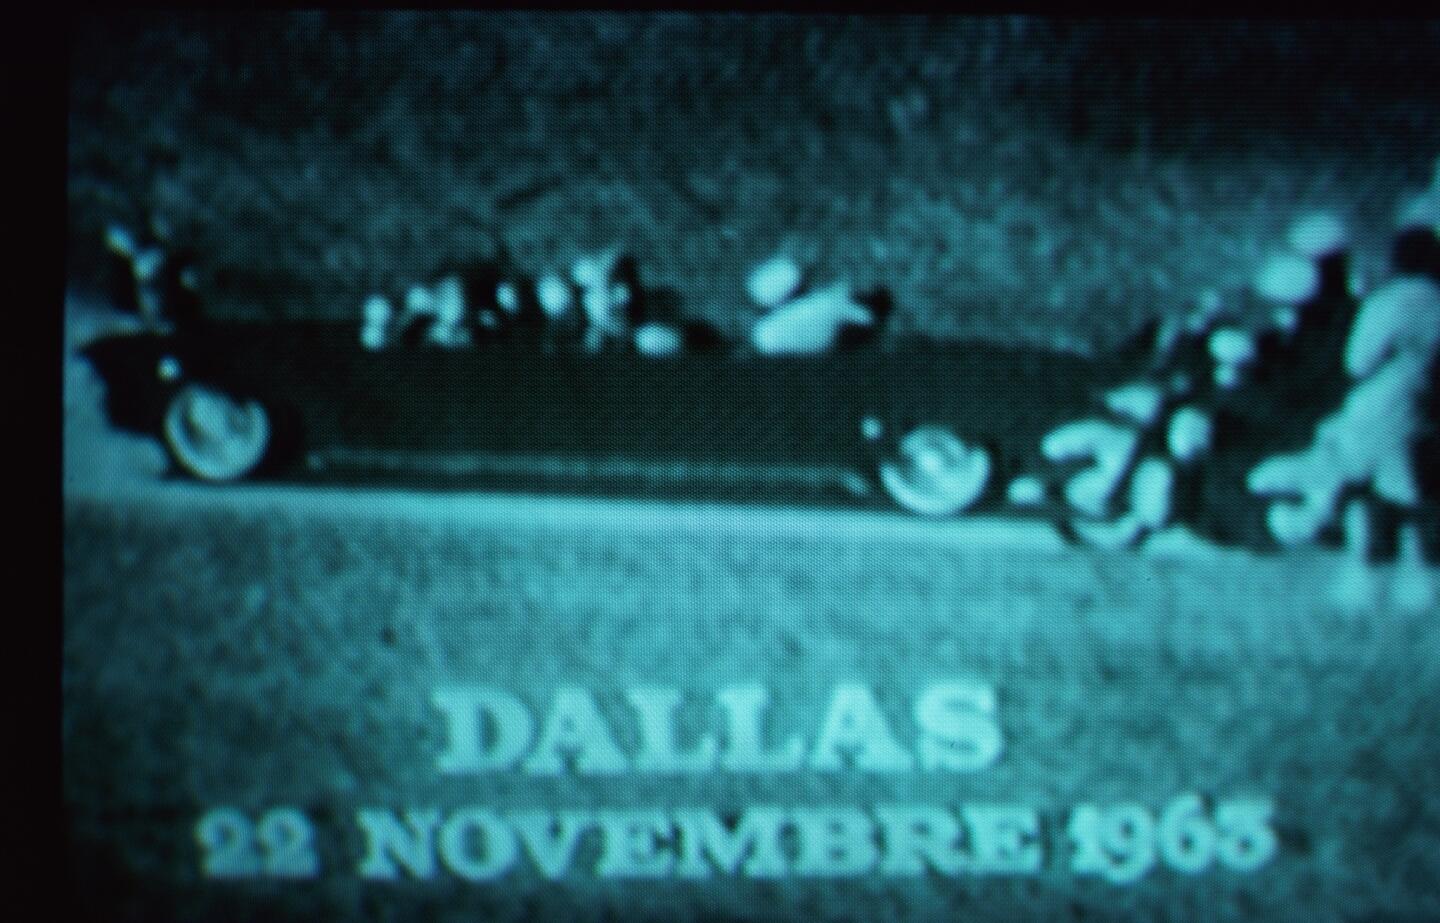 A photo of a May 1977 television broadcast of President John F. Kennedy and his wife, Jacqueline, in the presidential limousine in Dallas' Dealey Plaza moments after the president was shot dead on Nov. 22, 1963.